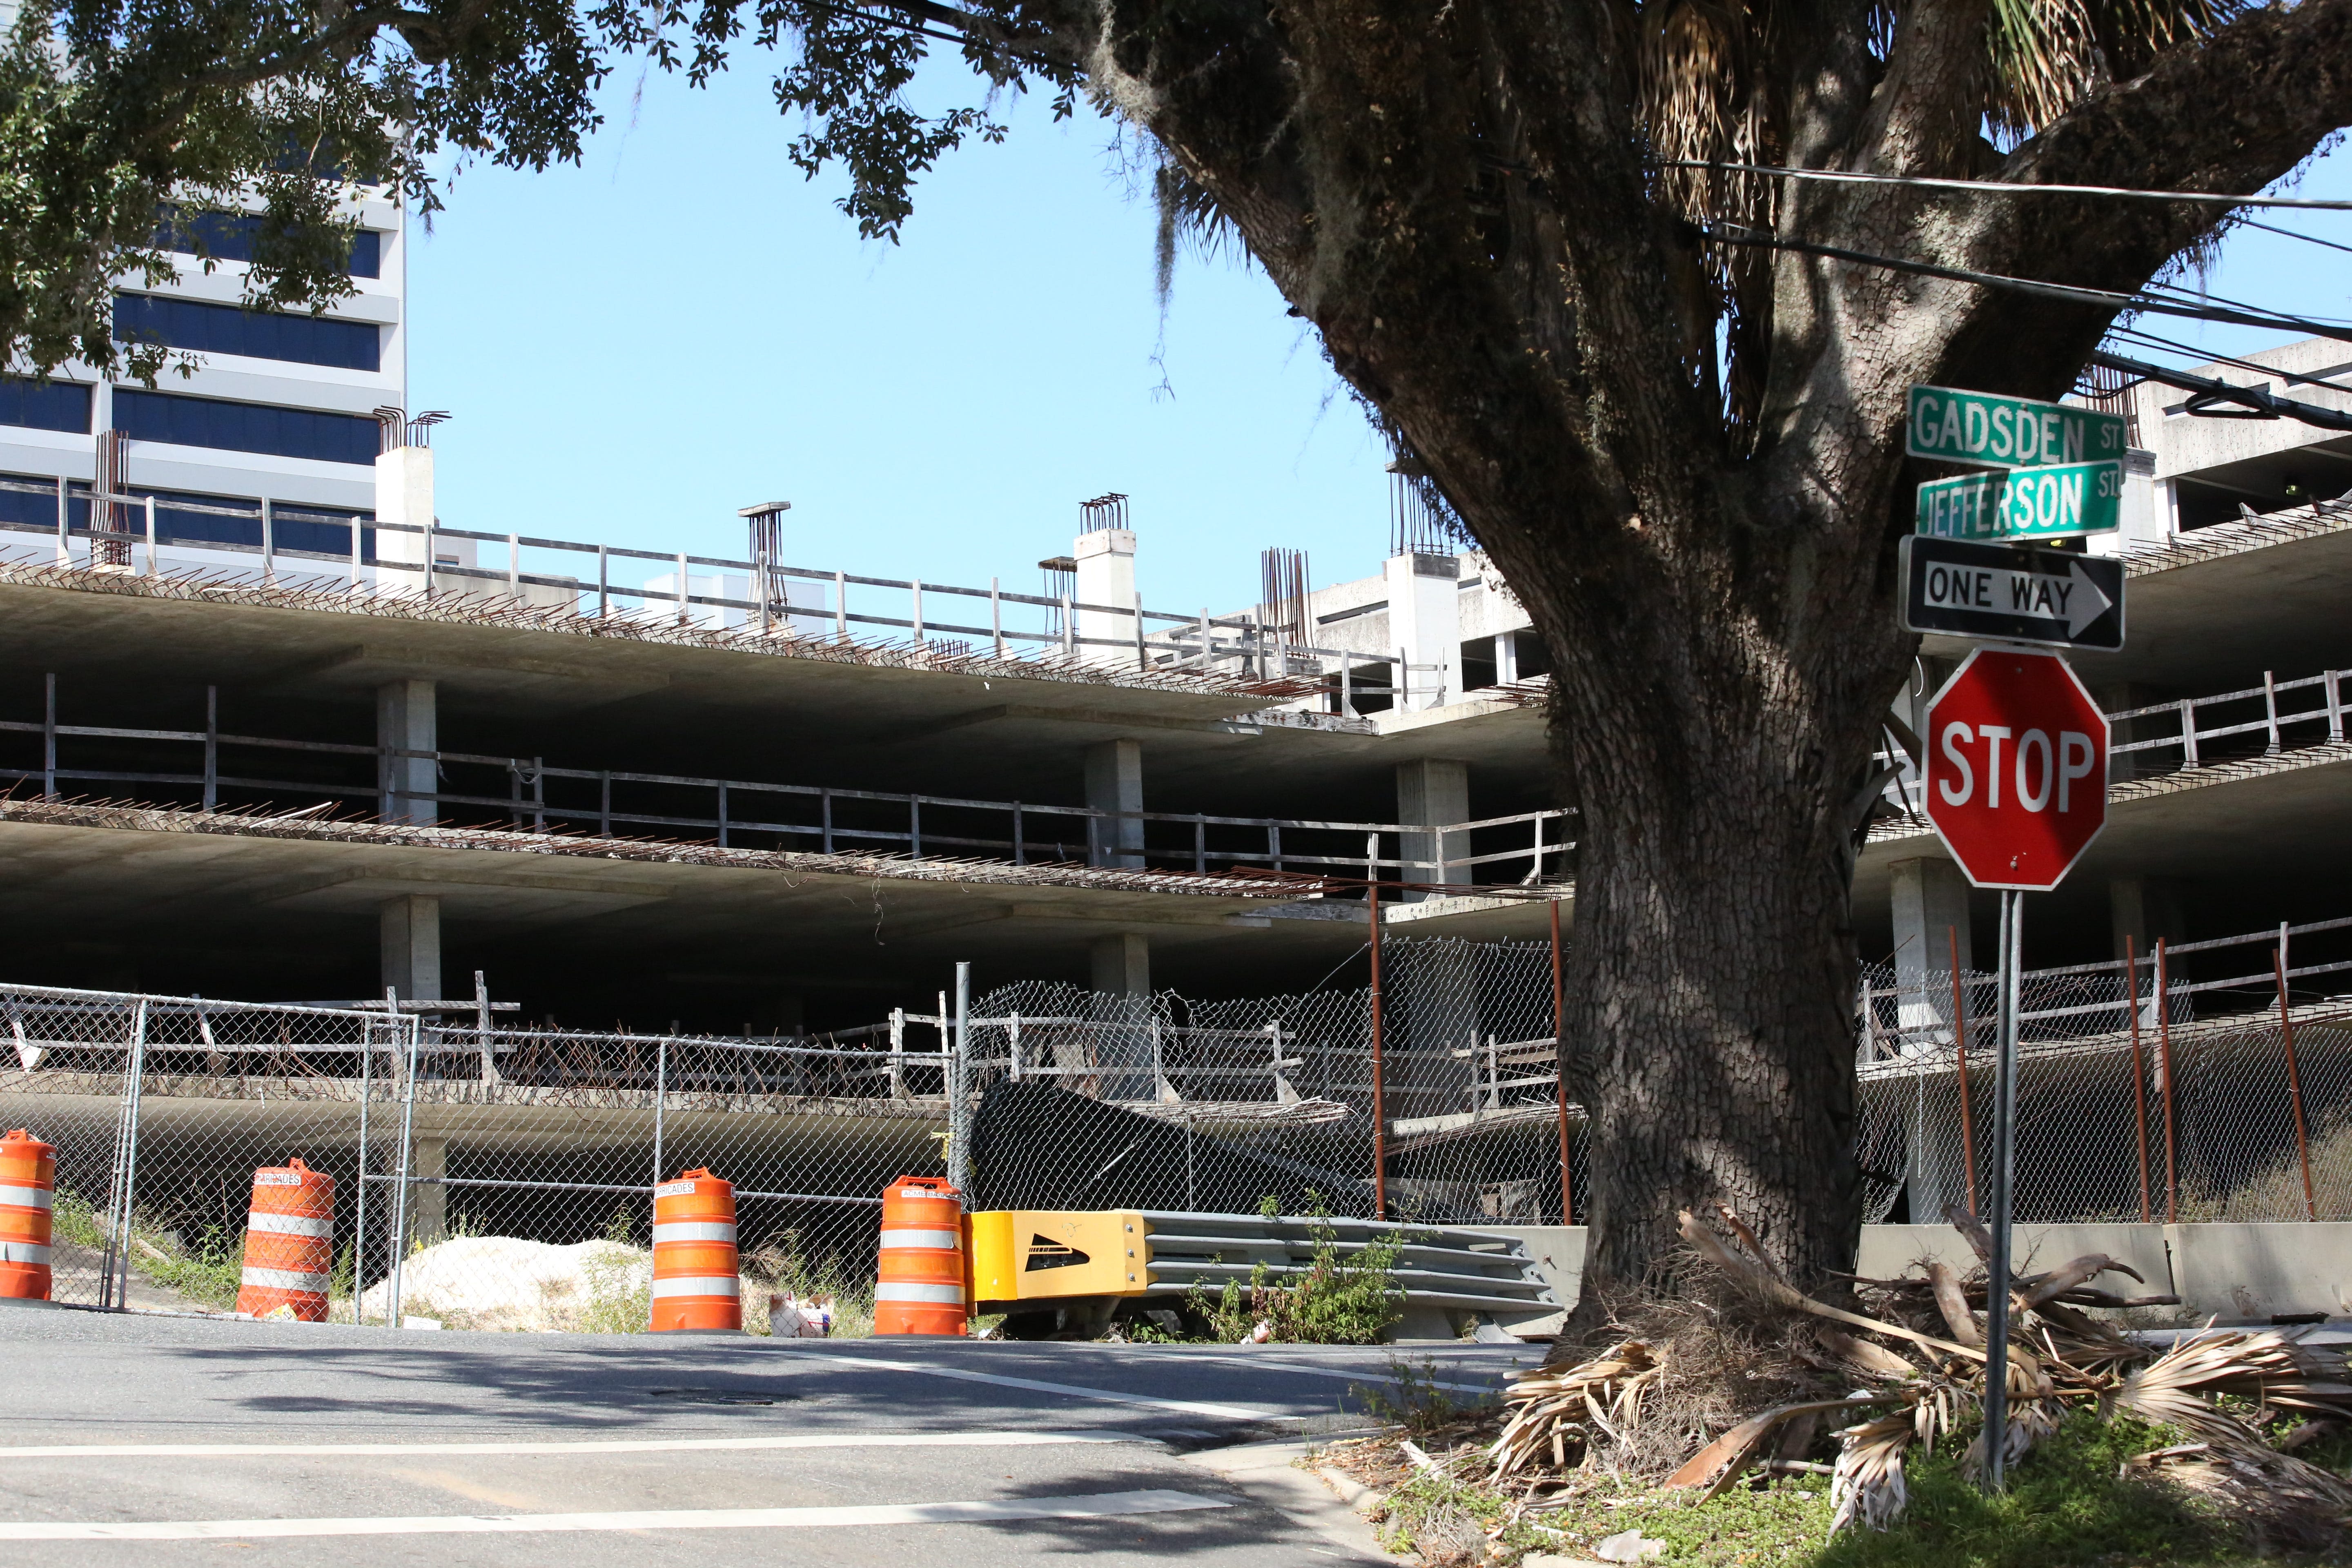 Tallahassee's Washington Square: Growing fines, rusting rebar. Can it ever be revived?